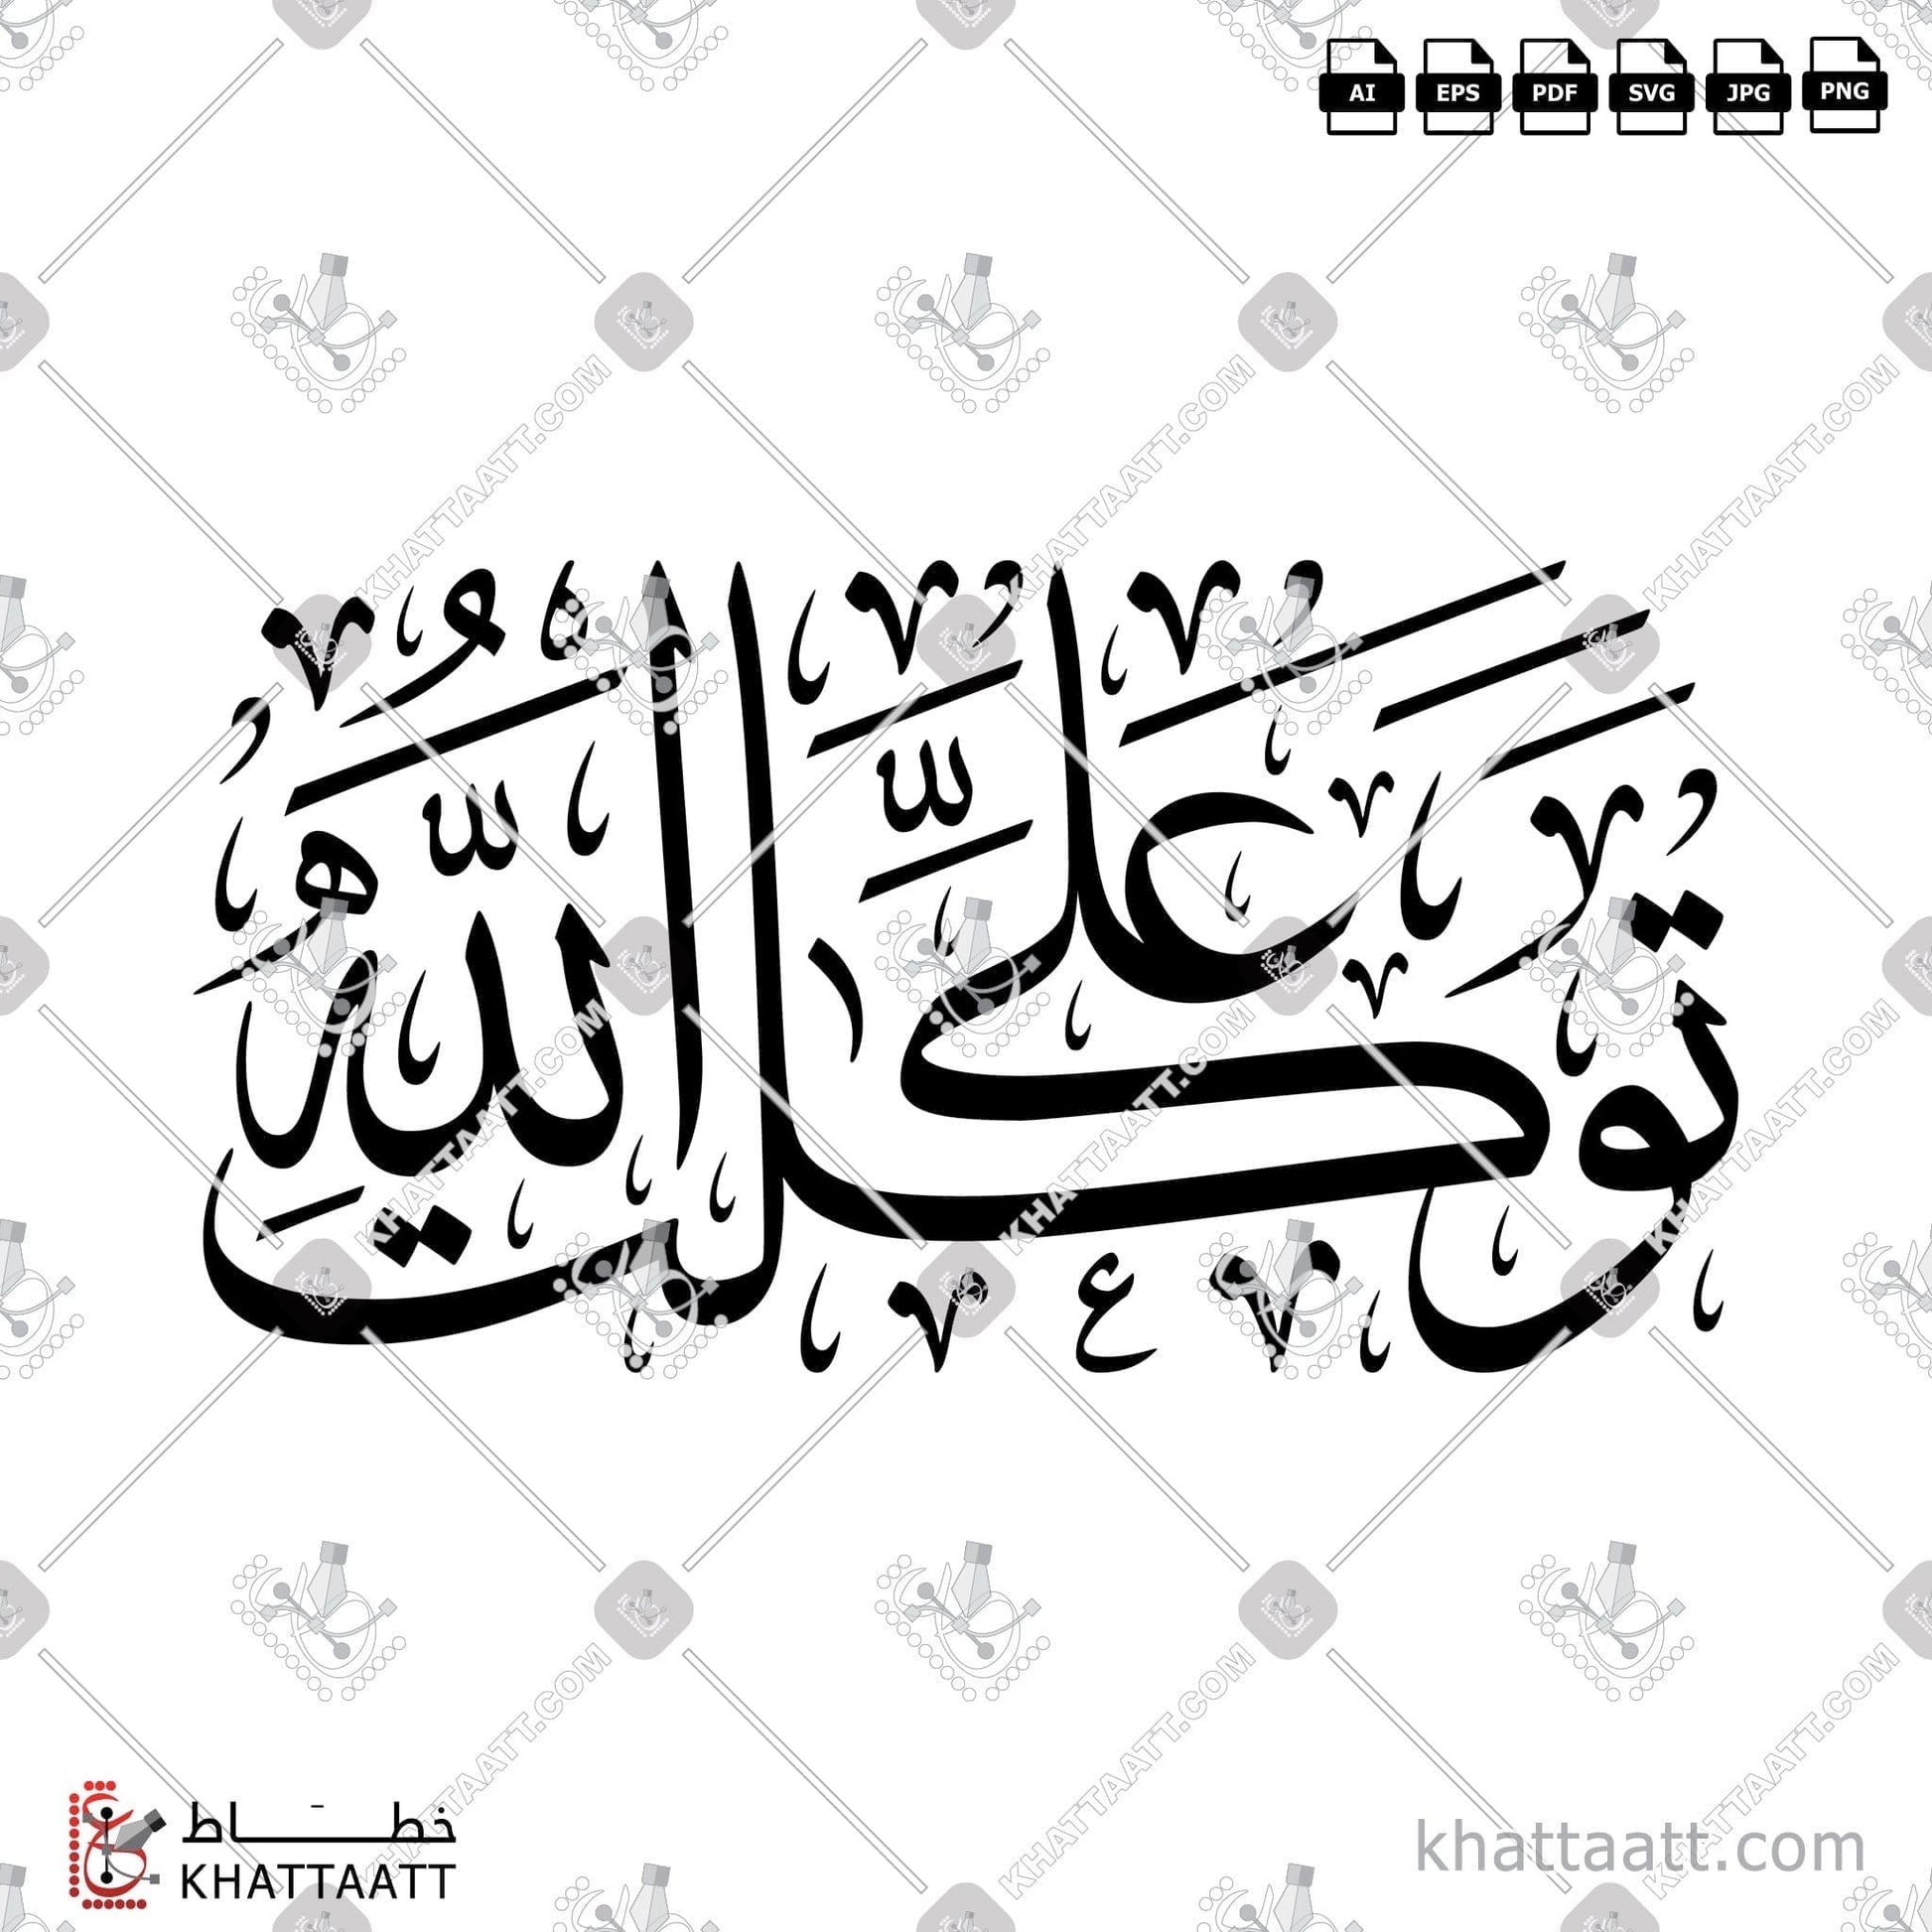 Download Arabic Calligraphy of توكلت على الله in Thuluth - خط الثلث in vector and .png